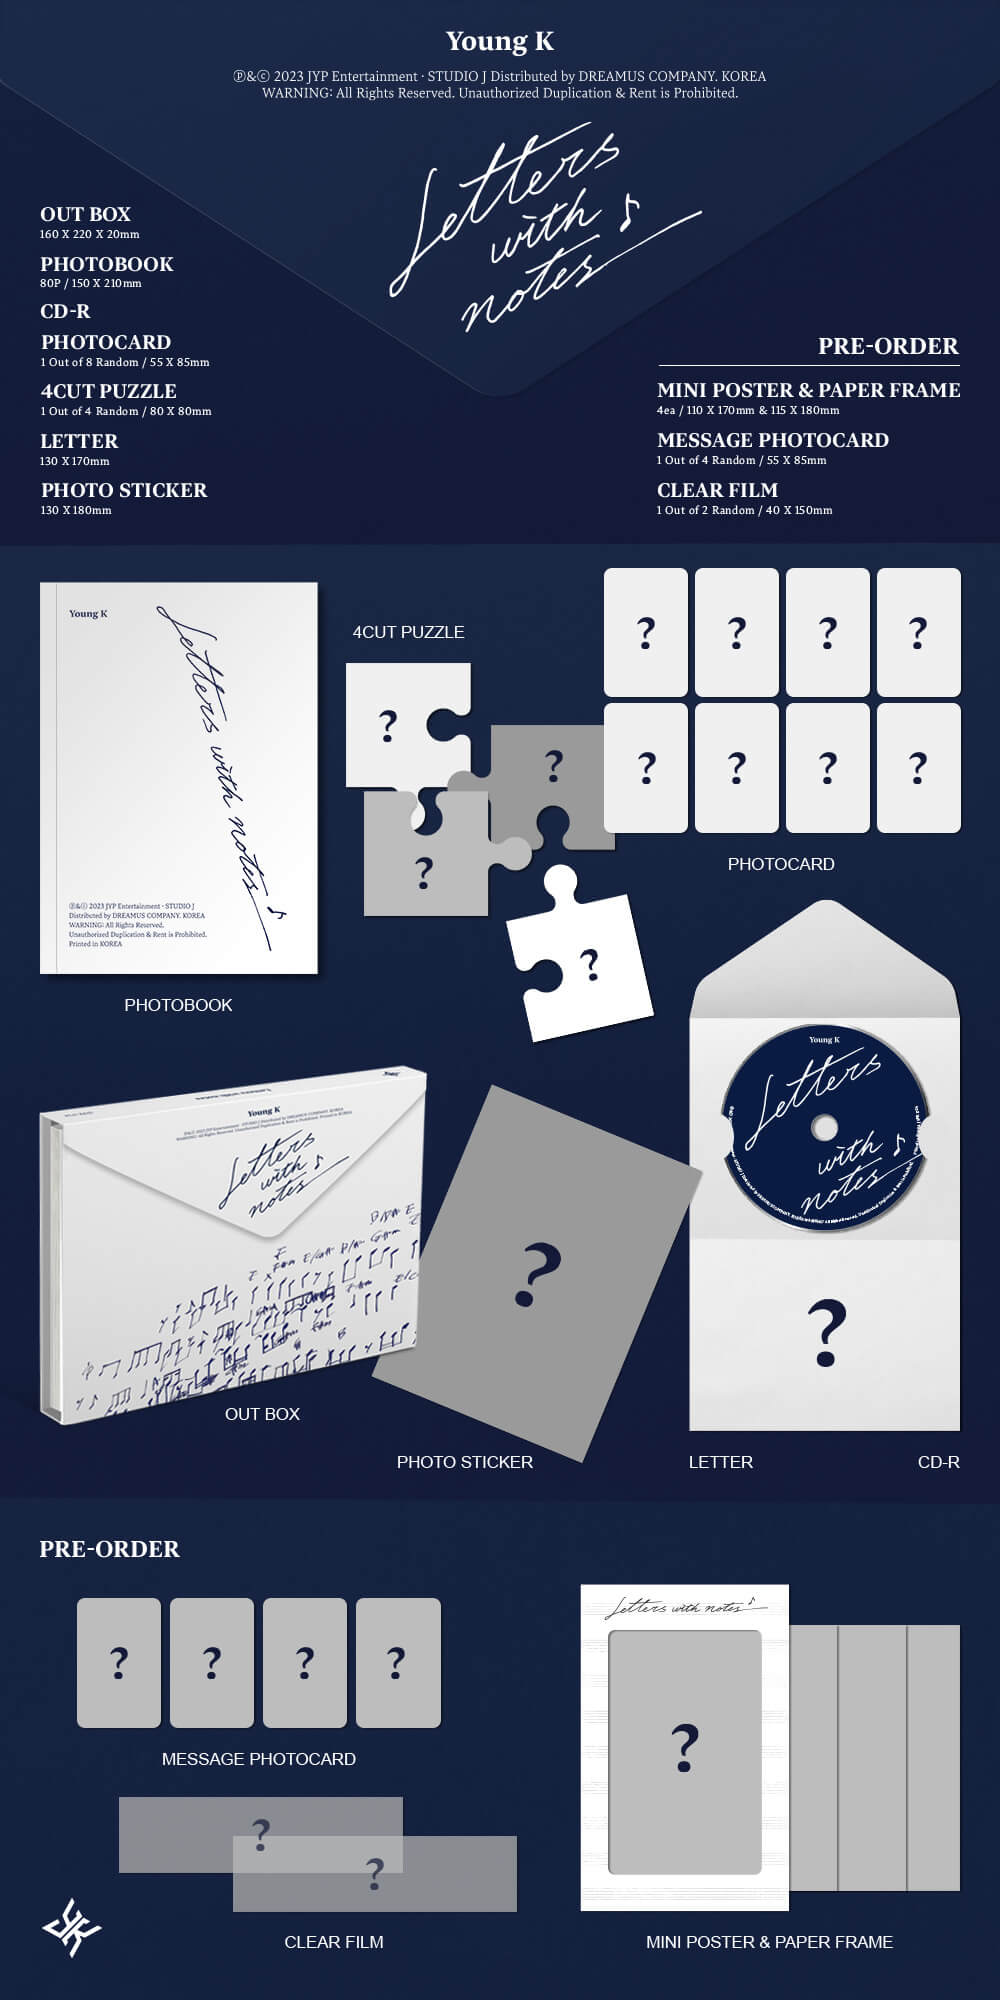 Young K Letters with notes Inclusions Out Box Photobook CD Photocard 4Cut Puzzle Letter Photo Sticker Pre-order Only Mini Poster Paper Frame Message Photocard Clear Film